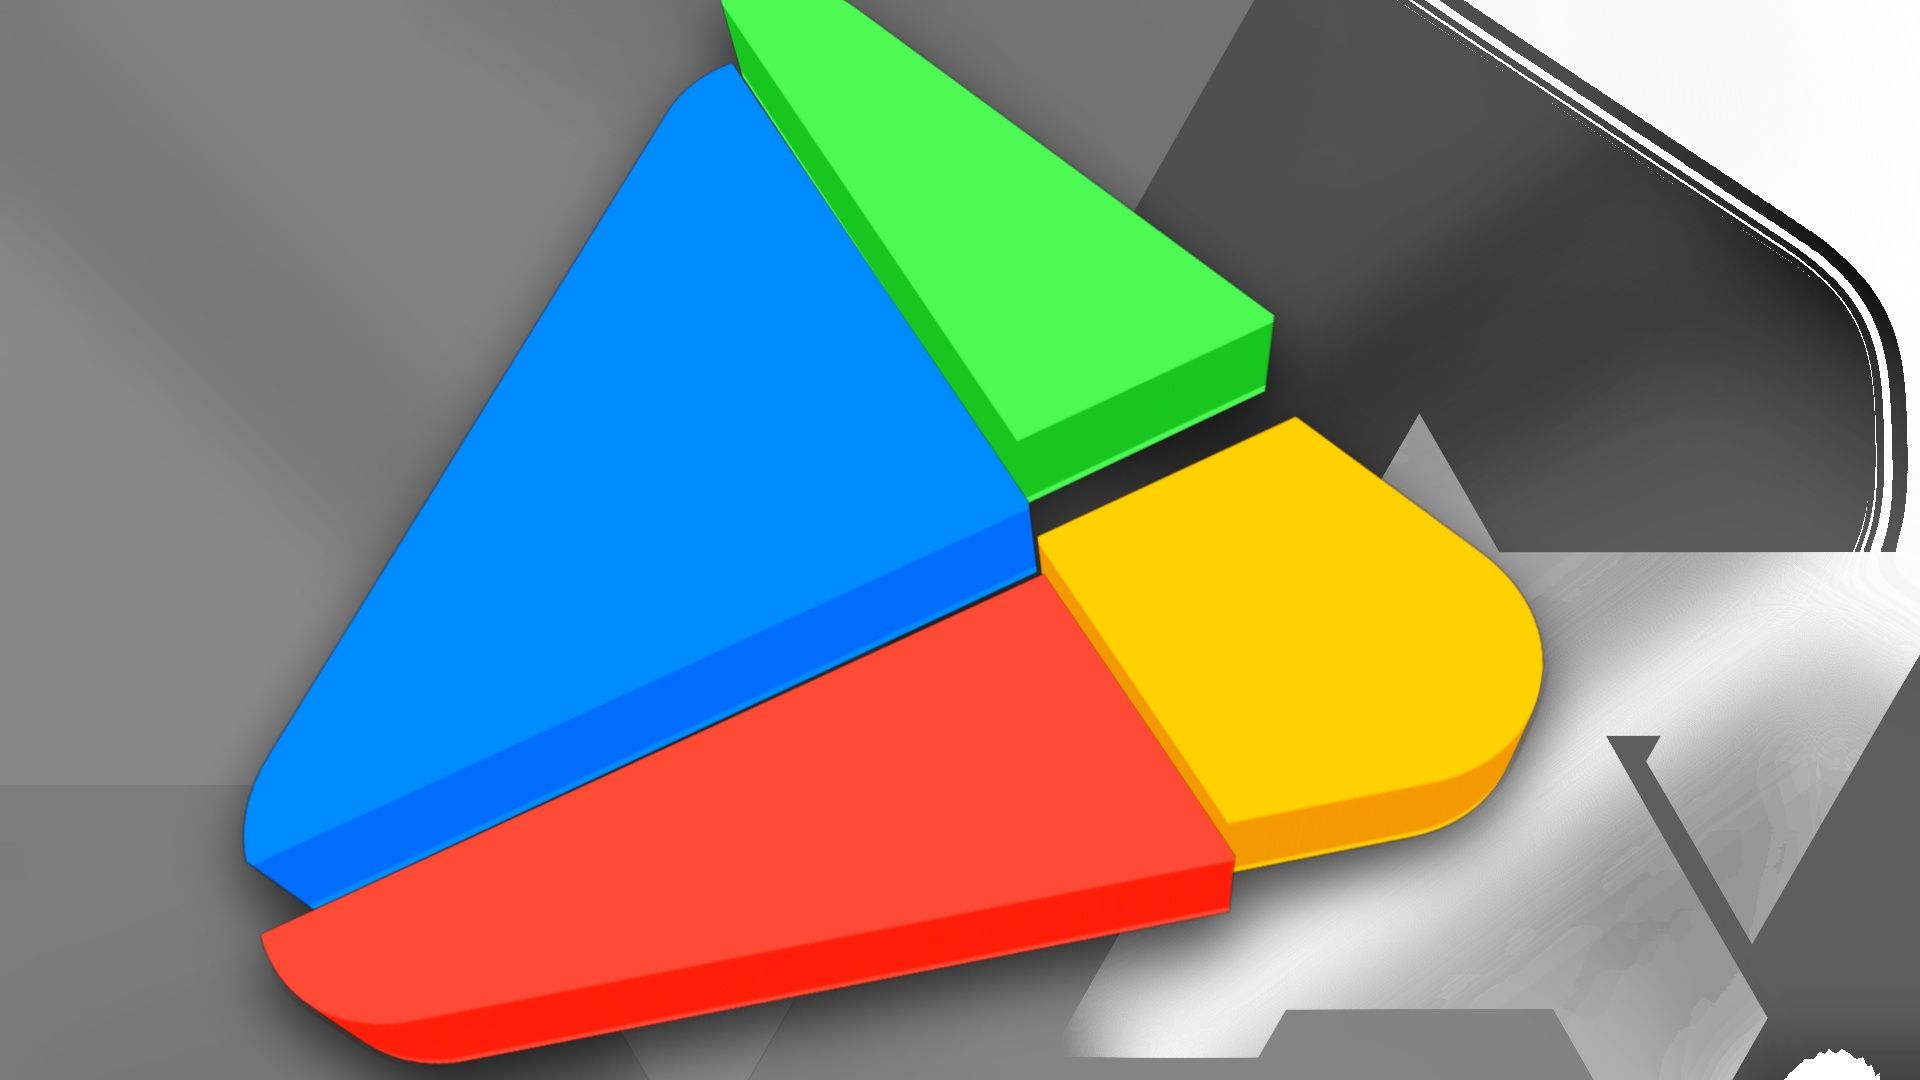 Google Play Store v12.9.12 APK to Download for All AndroidDevices